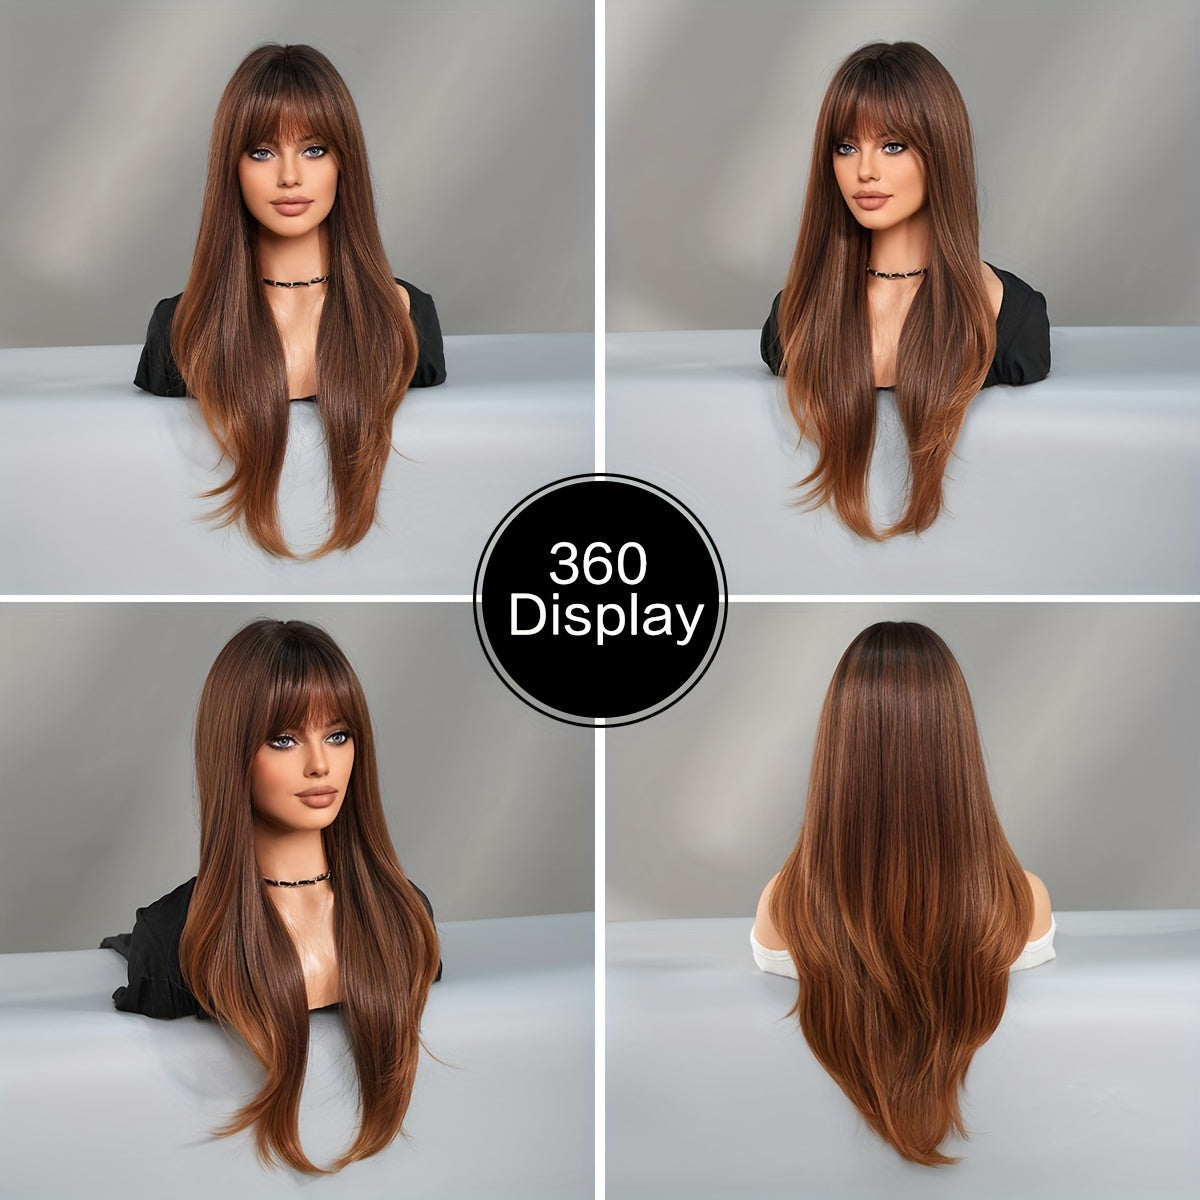 Synthetic Layered Wavy Dark Ombre Blonde Wig For Women Daily Use Long Wavy Wigs With Bangs 66.04cm